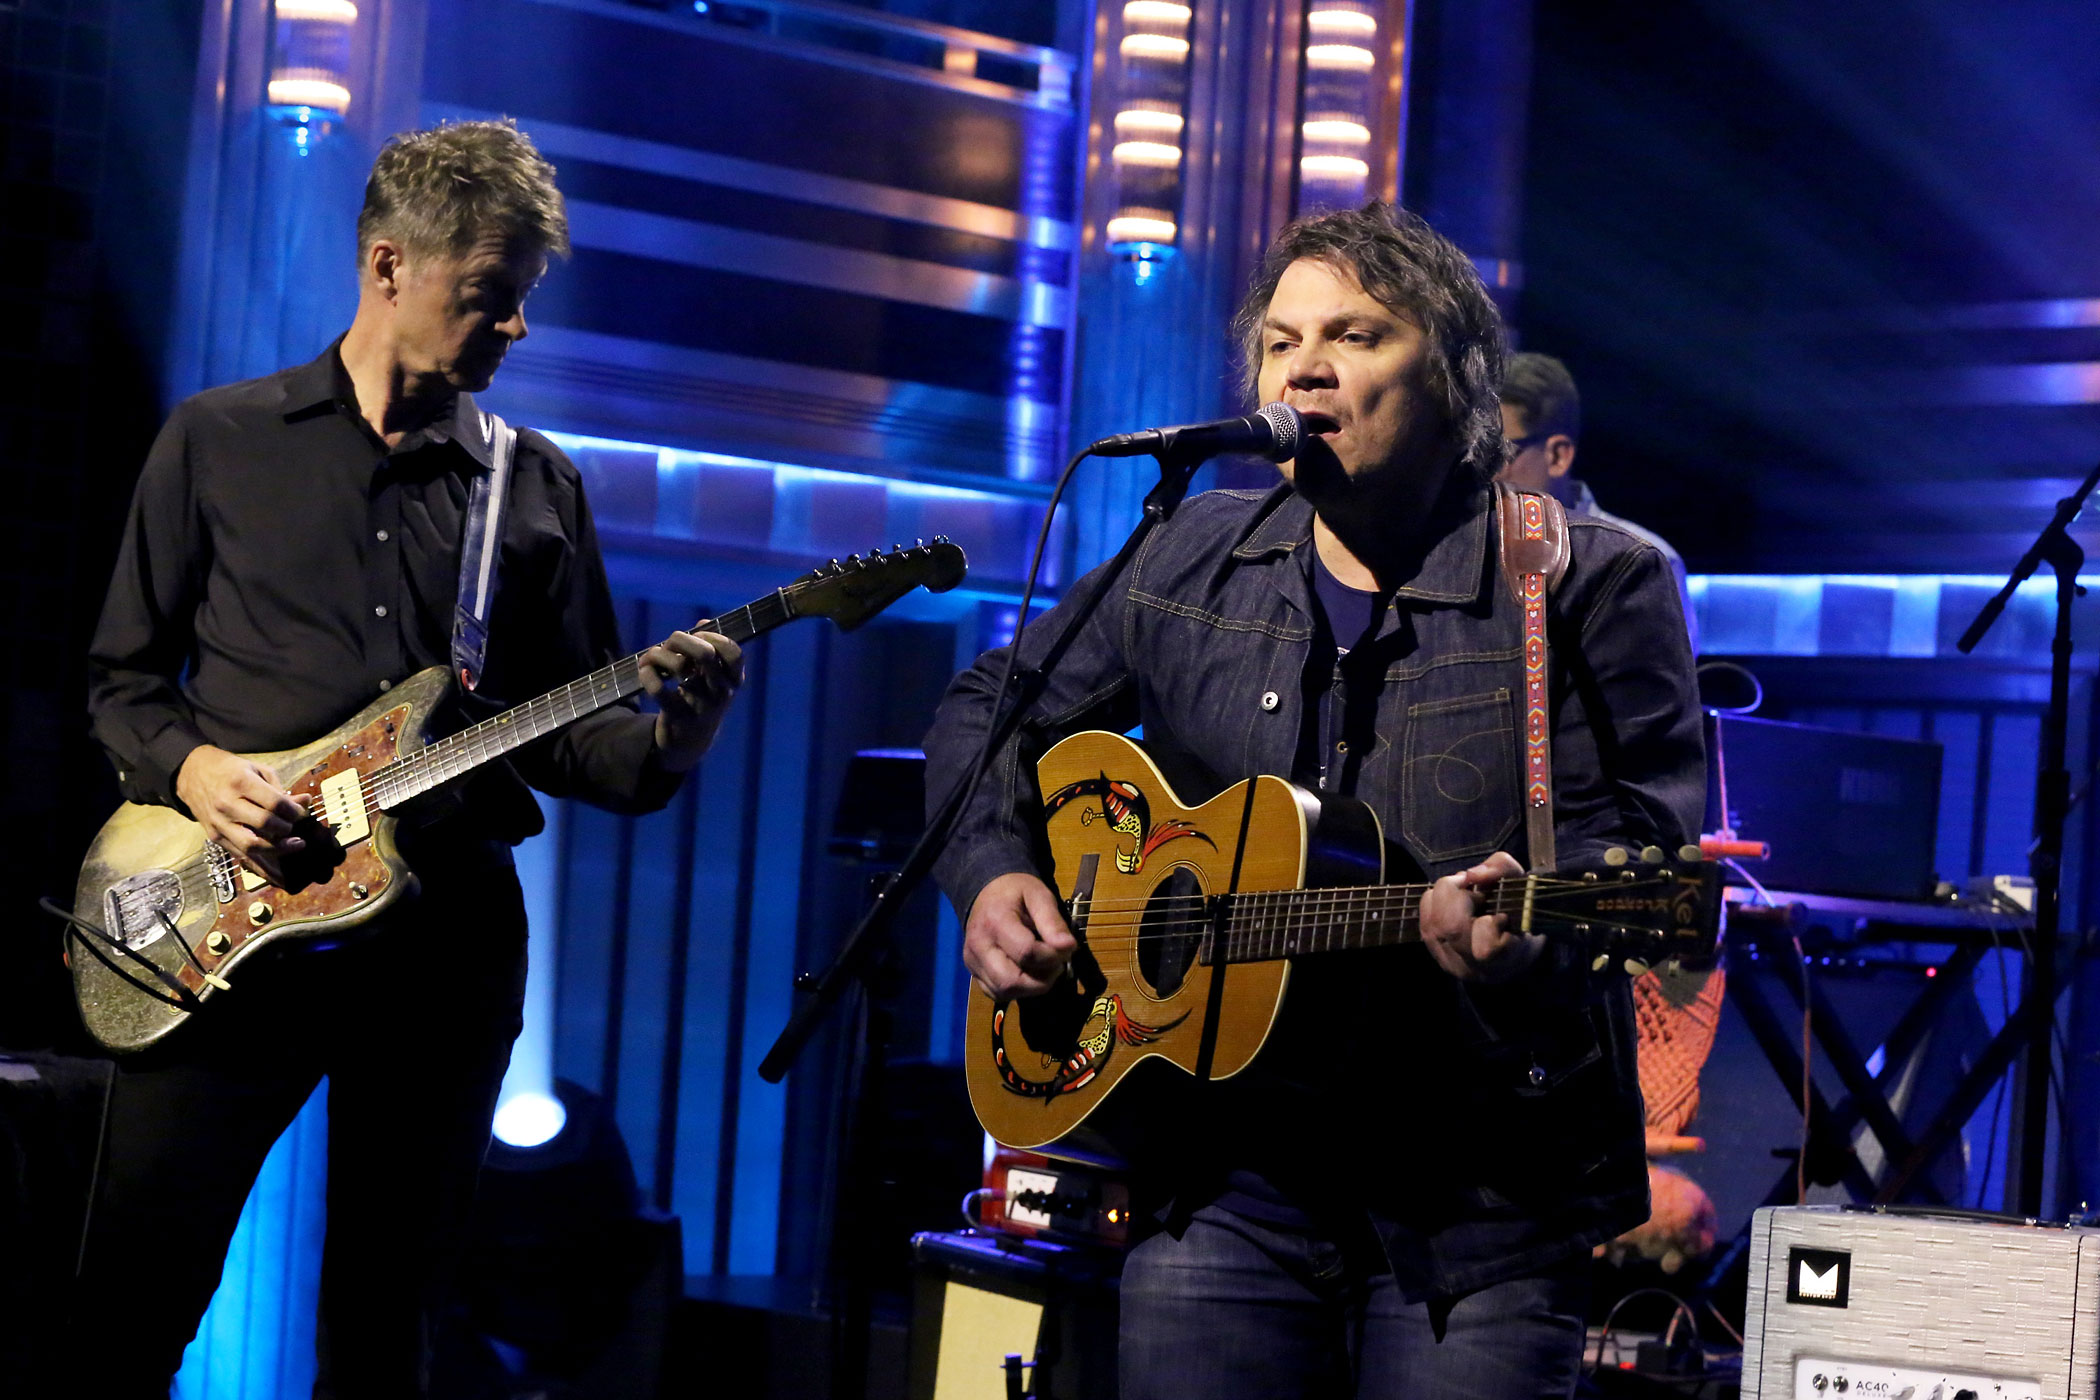 Nels Cline and Jeff Tweedy of Wilco perform on October 27, 2014. (Douglas Gorenstein—NBC/Getty Images)